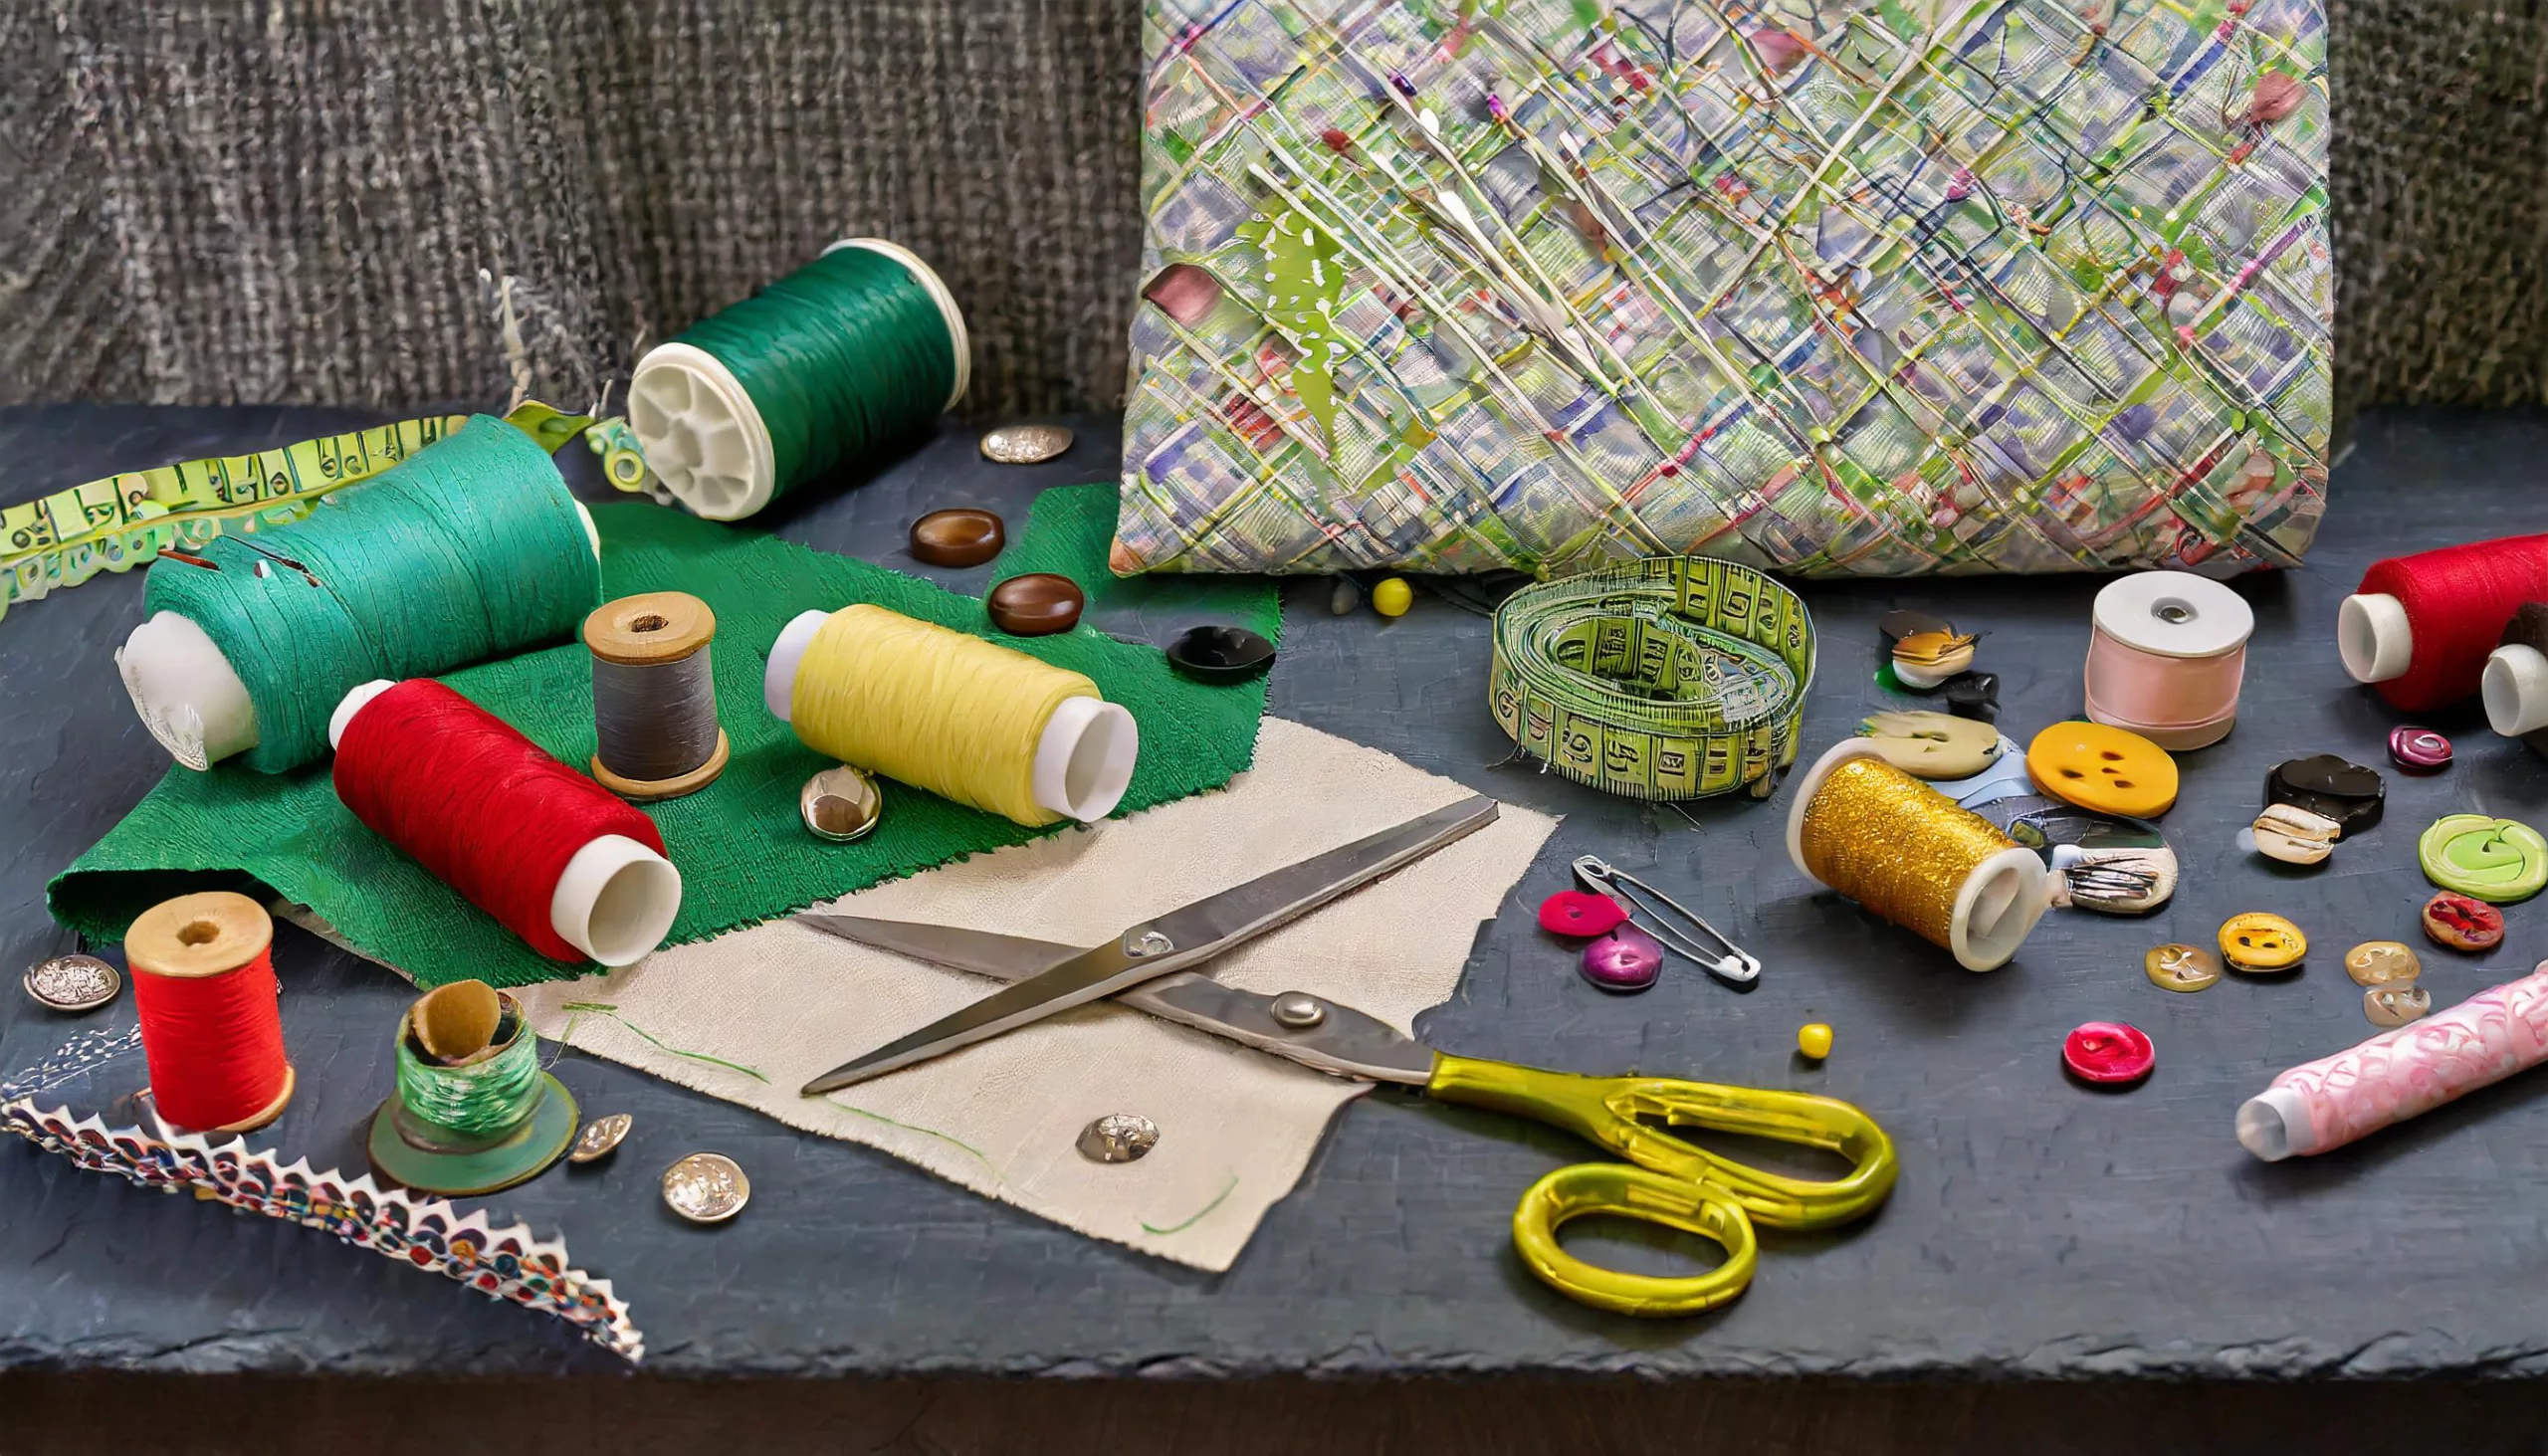 Sewing items laid out on a table.